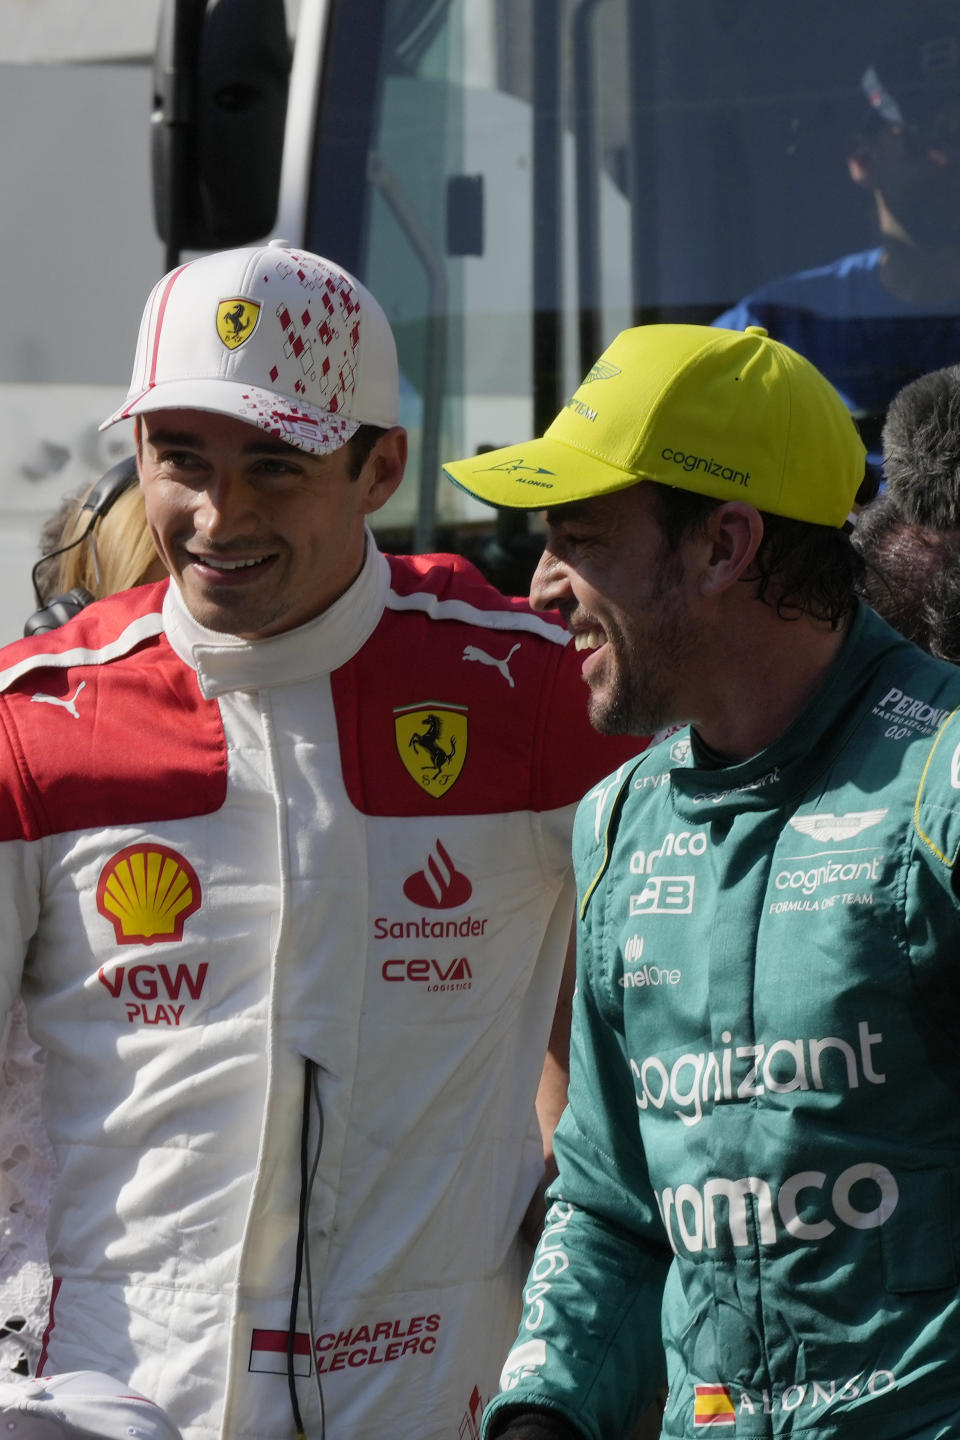 Ferrari driver Charles Leclerc of Monaco, left, speaks with Aston Martin driver Fernando Alonso of Spain at the end of the Formula One qualifying session at the Monaco racetrack, in Monaco, Saturday, May 27, 2023. The Formula One race will be held on Sunday. (AP Photo/Luca Bruno)